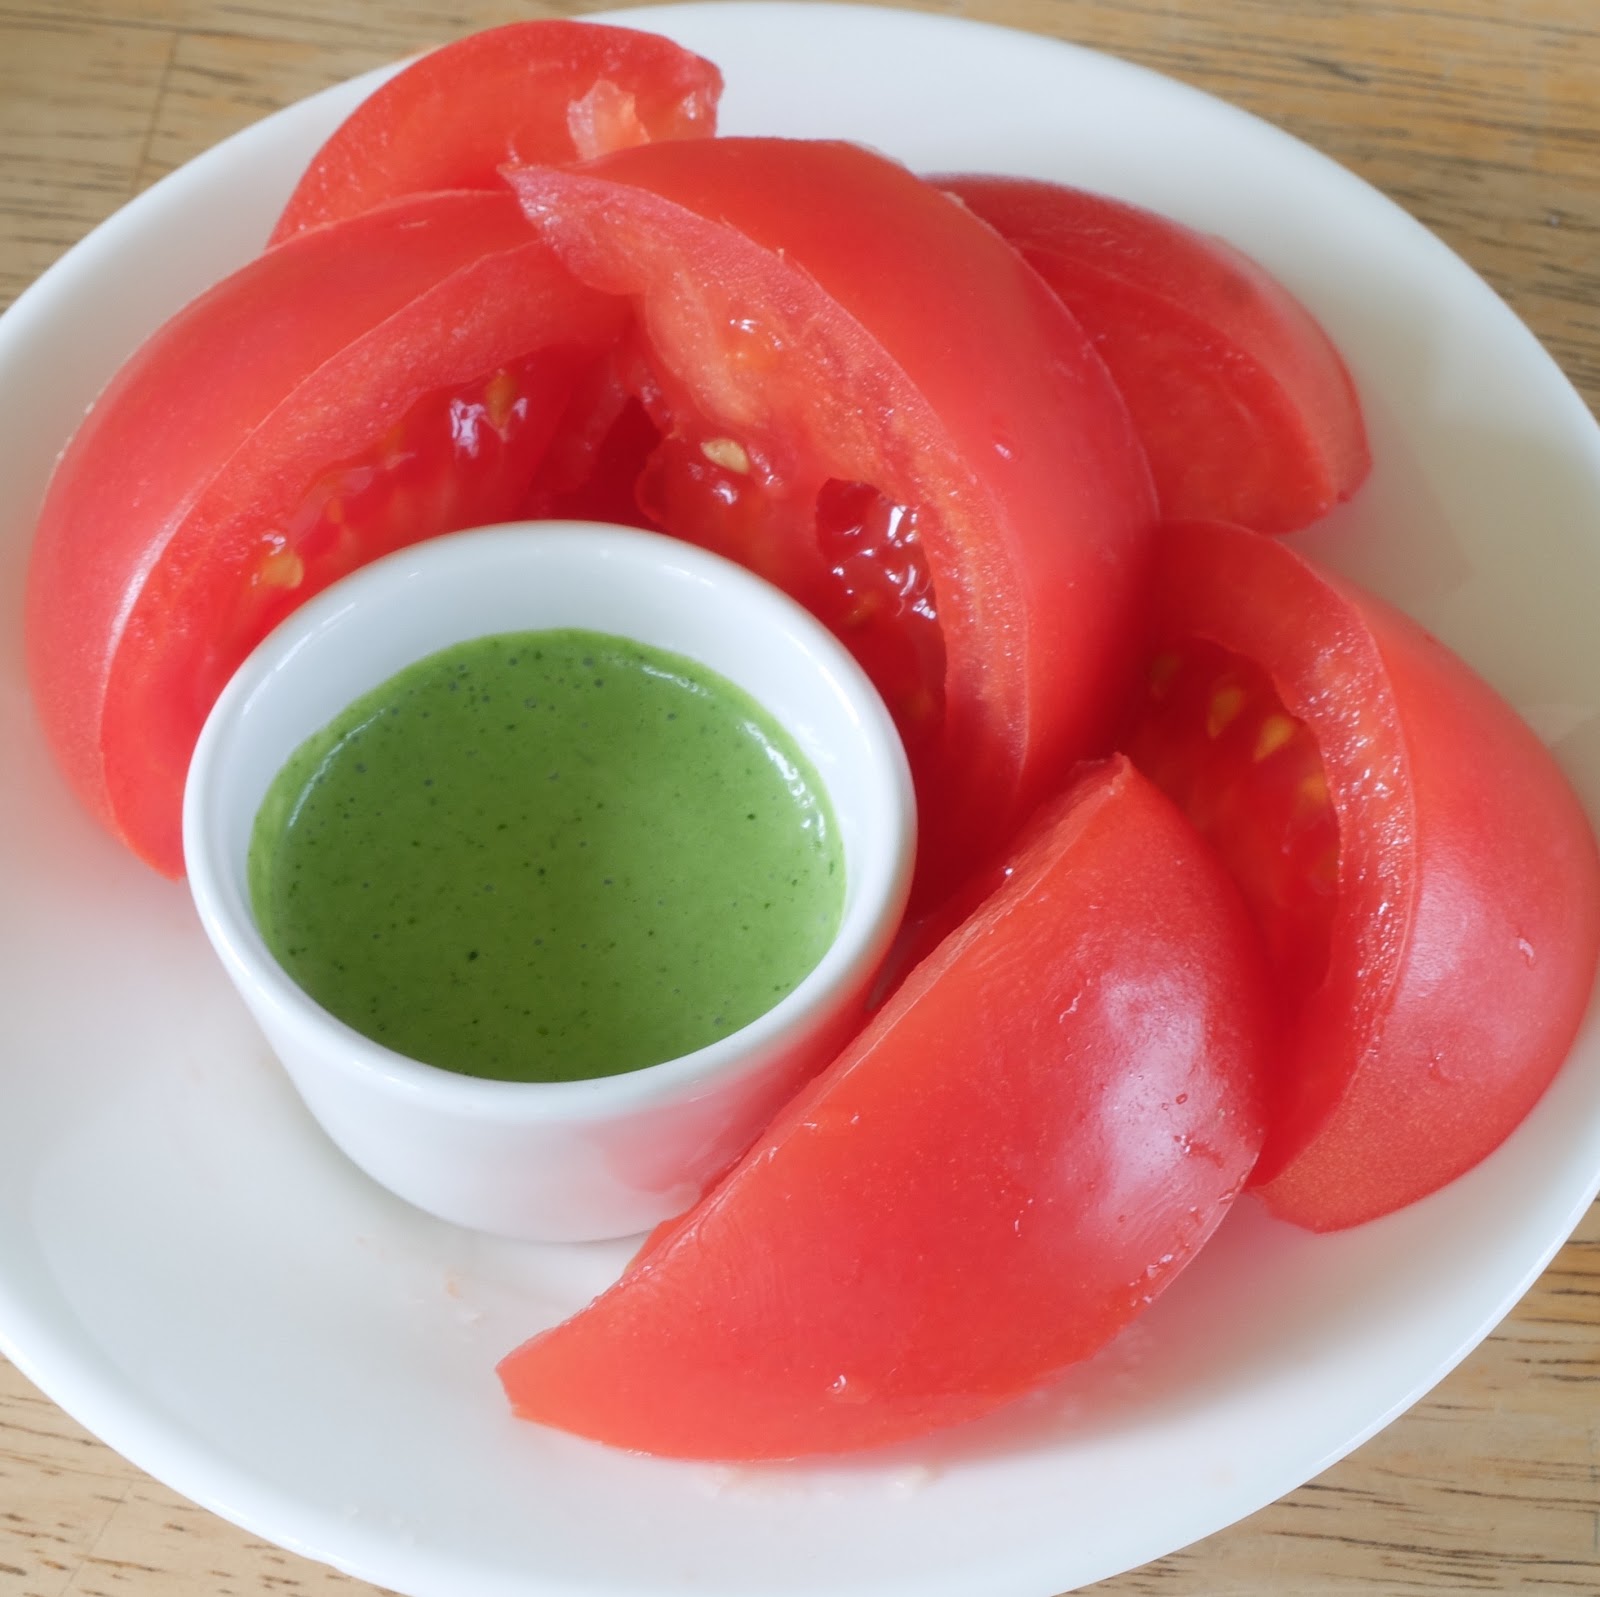  Green Goddess dressing with ripe tomatoes